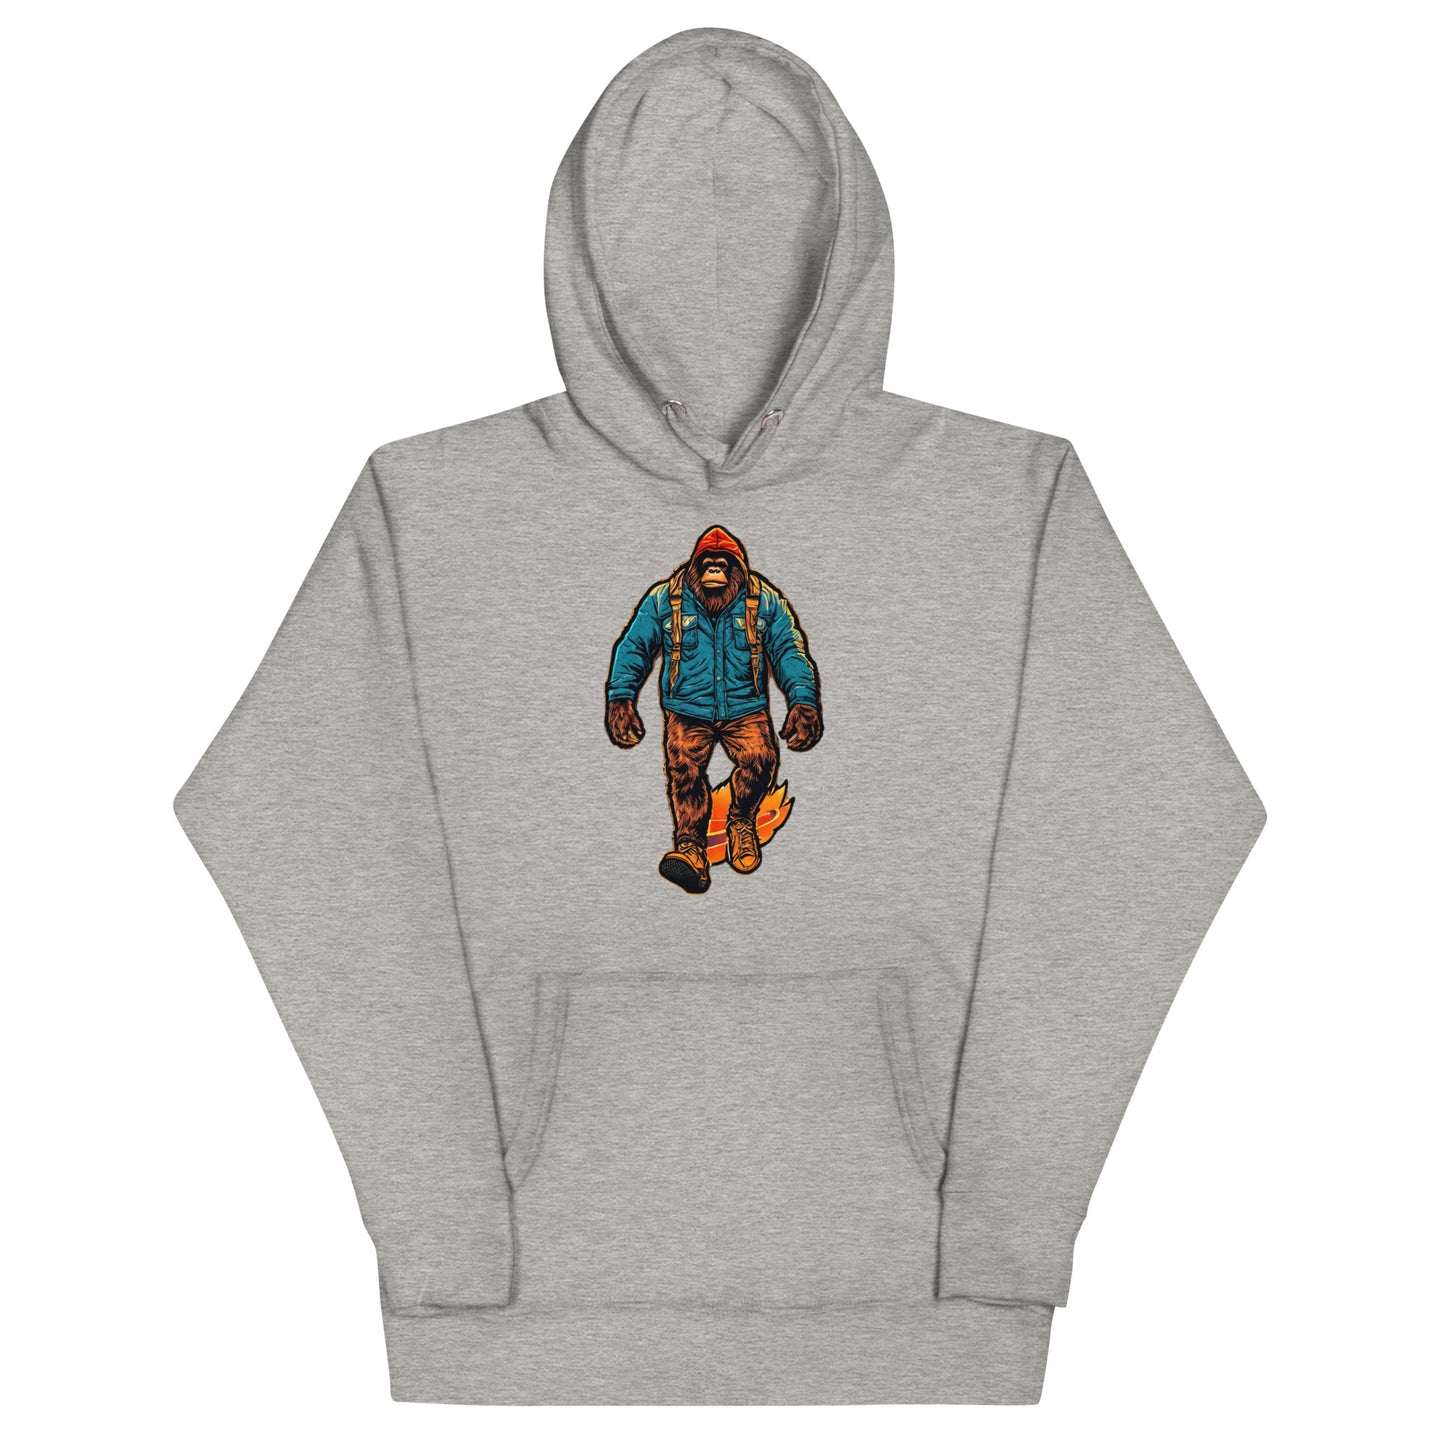 Bigfoot on a Hike Graphic Hoodie Carbon Grey